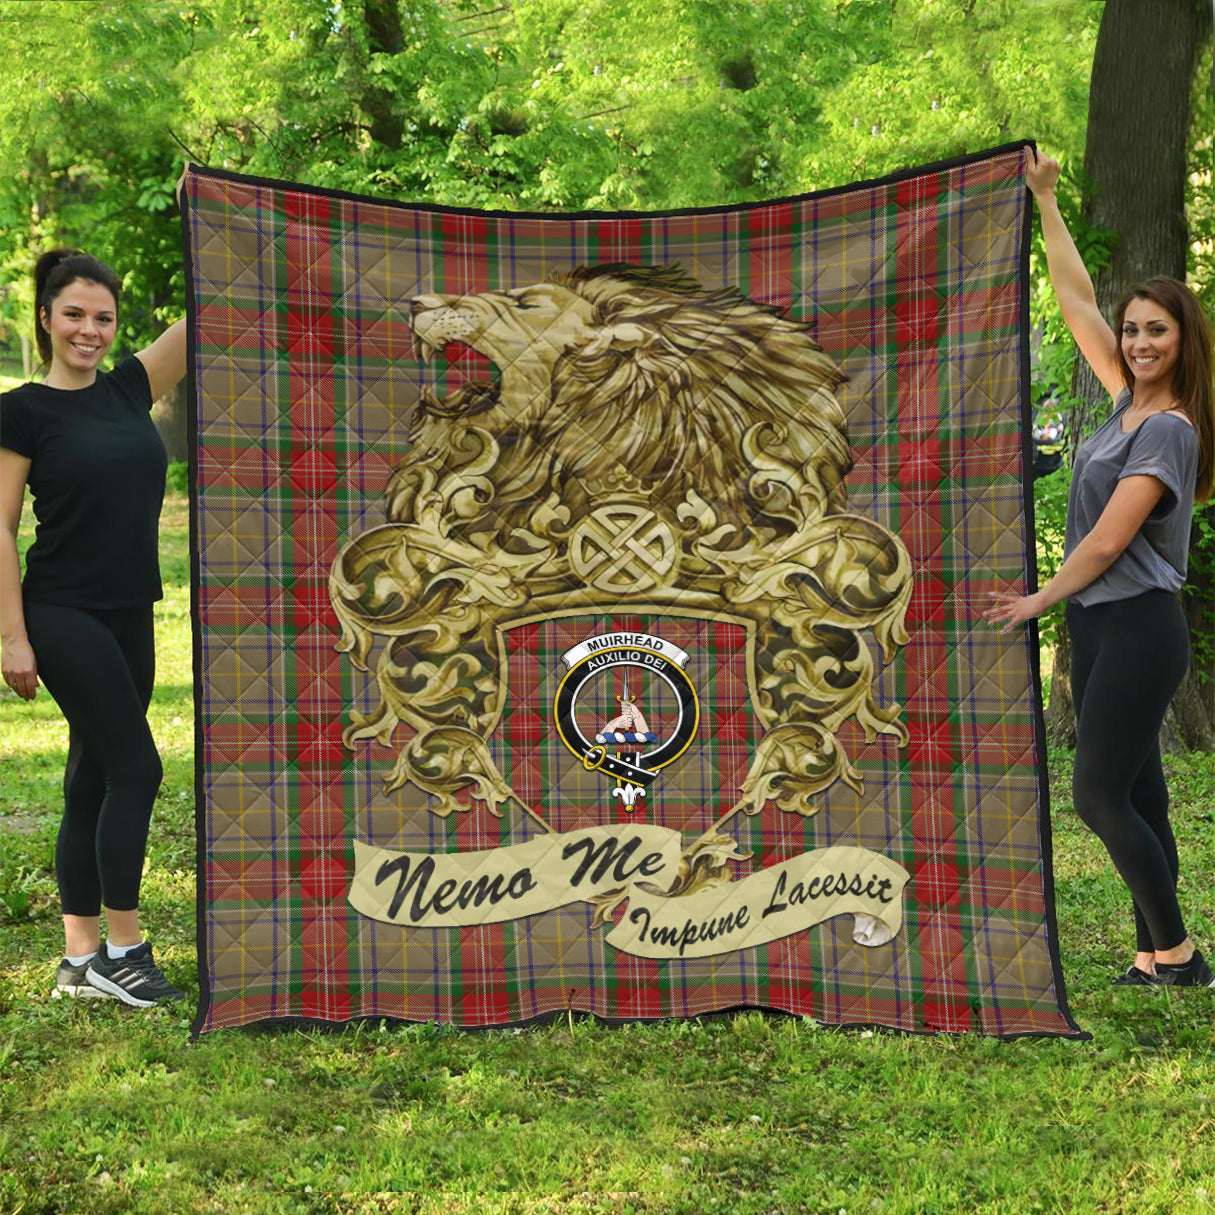 muirhead-old-tartan-quilt-with-motto-nemo-me-impune-lacessit-with-vintage-lion-family-crest-tartan-quilt-pattern-scottish-tartan-plaid-quilt-vintage-style